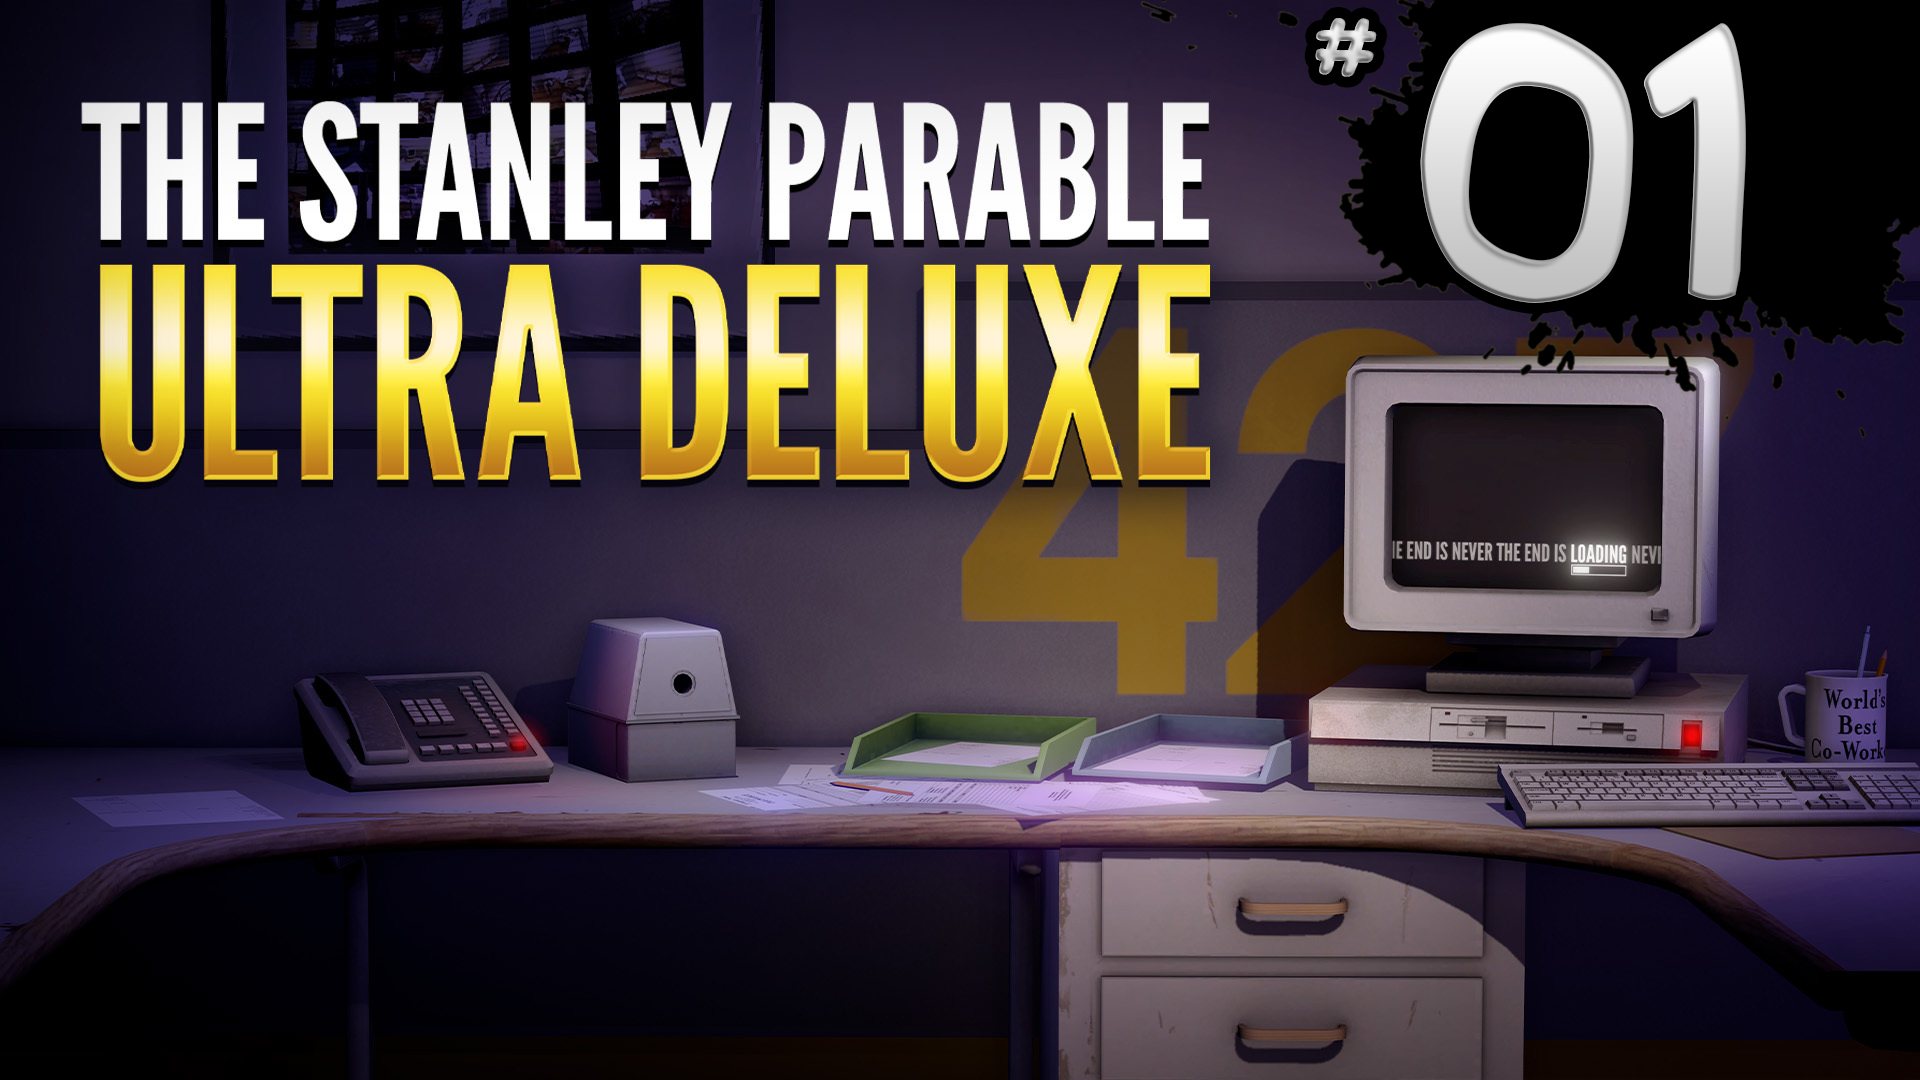 Parable ultra deluxe. Stanley Parable Ultra Deluxe Edition. Ultra Deluxe Stanley. The Stanley Parable: Ultra Deluxe. Зе Стенли парабл 2.